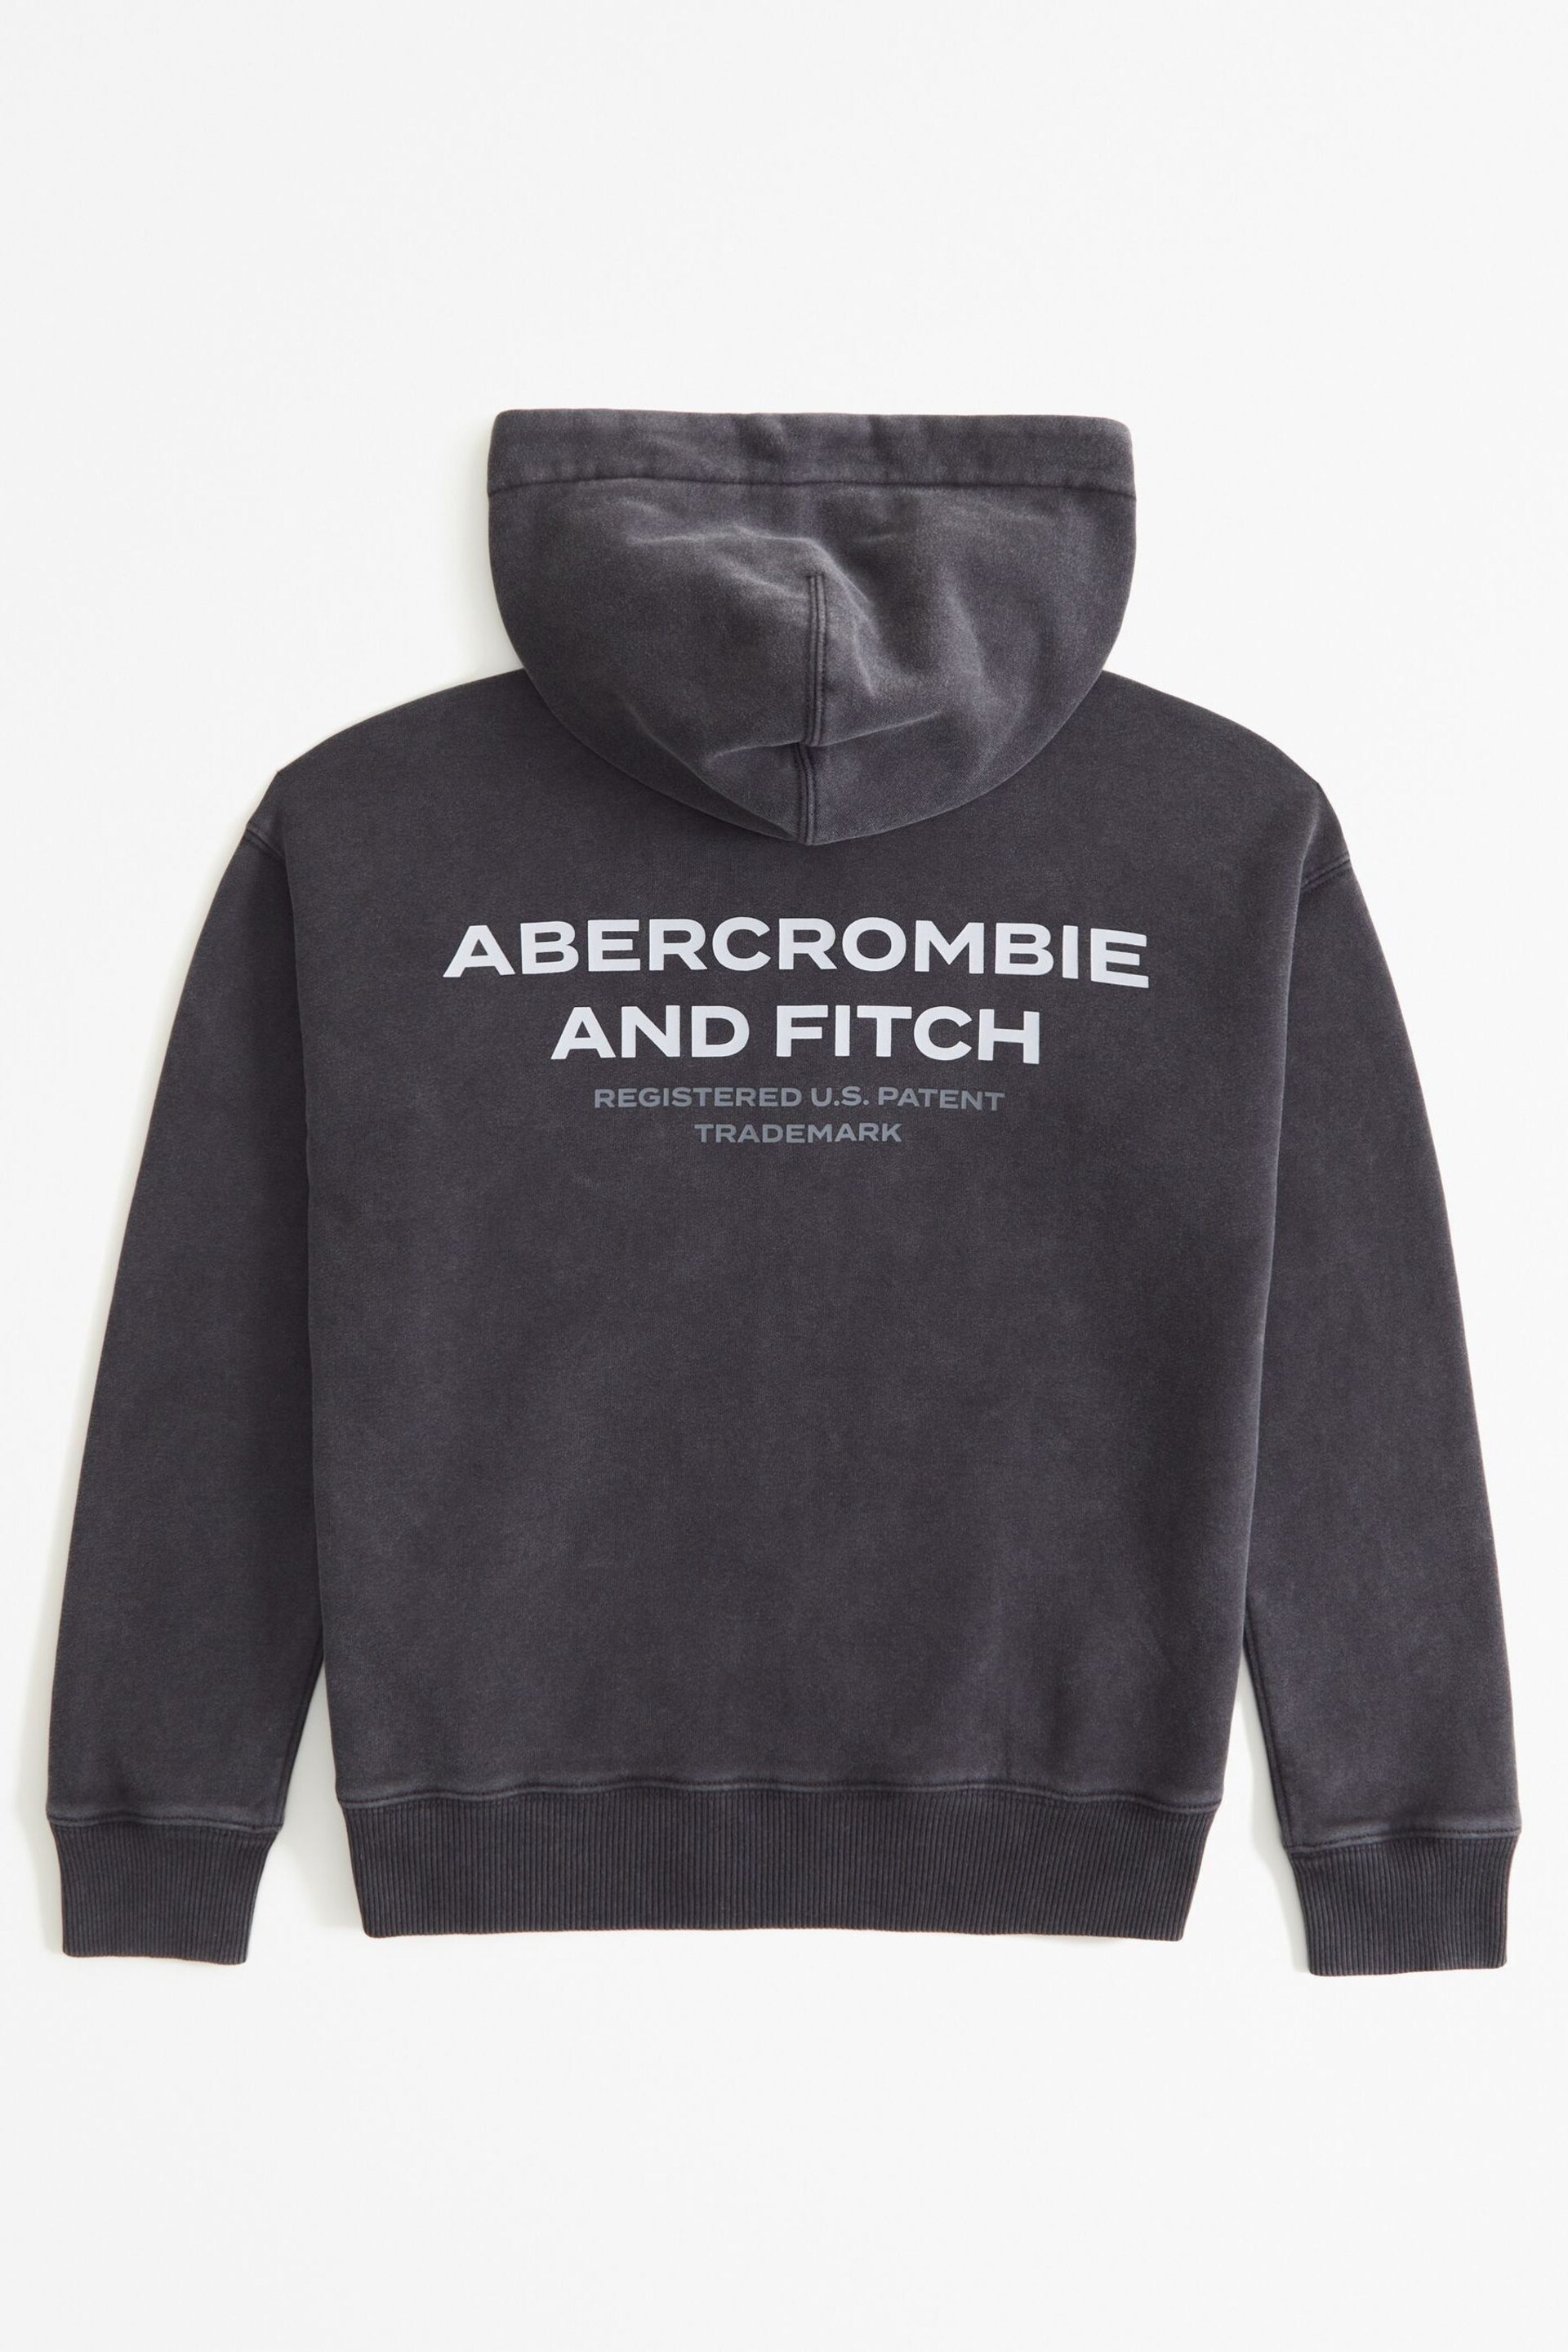 Abercrombie & Fitch Grey Zip-Through Logo Hoodie - Image 2 of 2